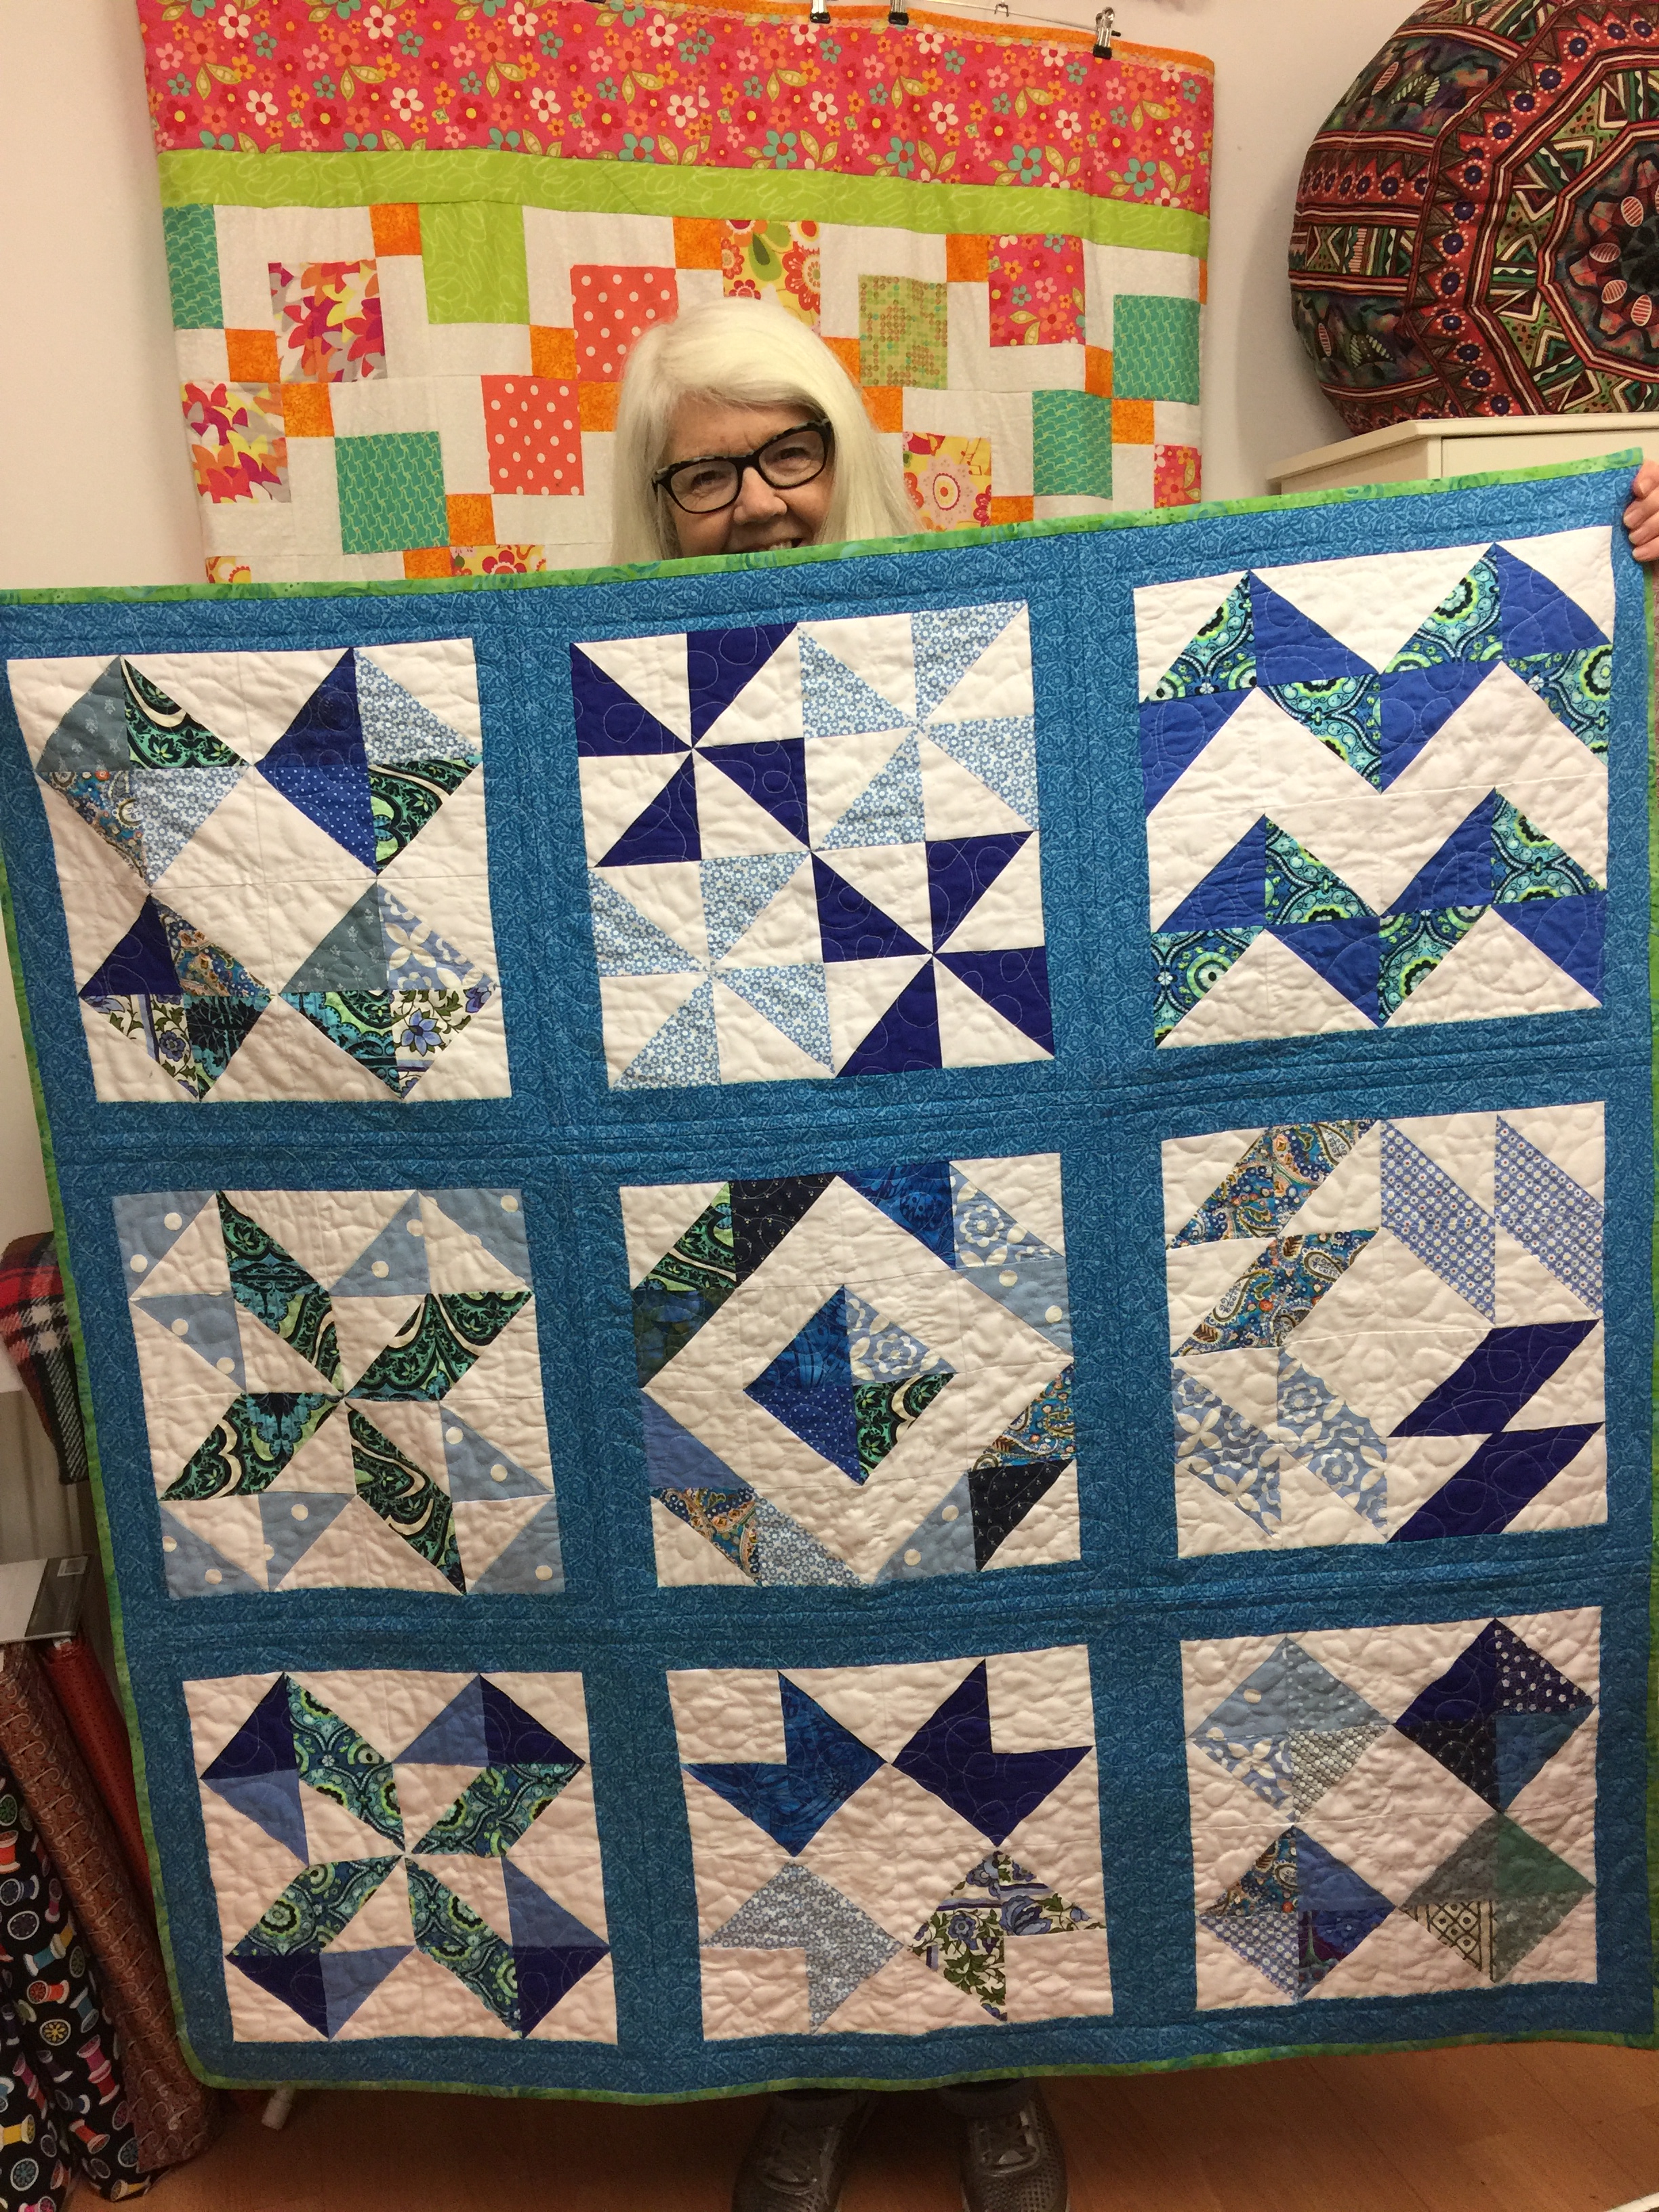 A quilt made from half square triangles